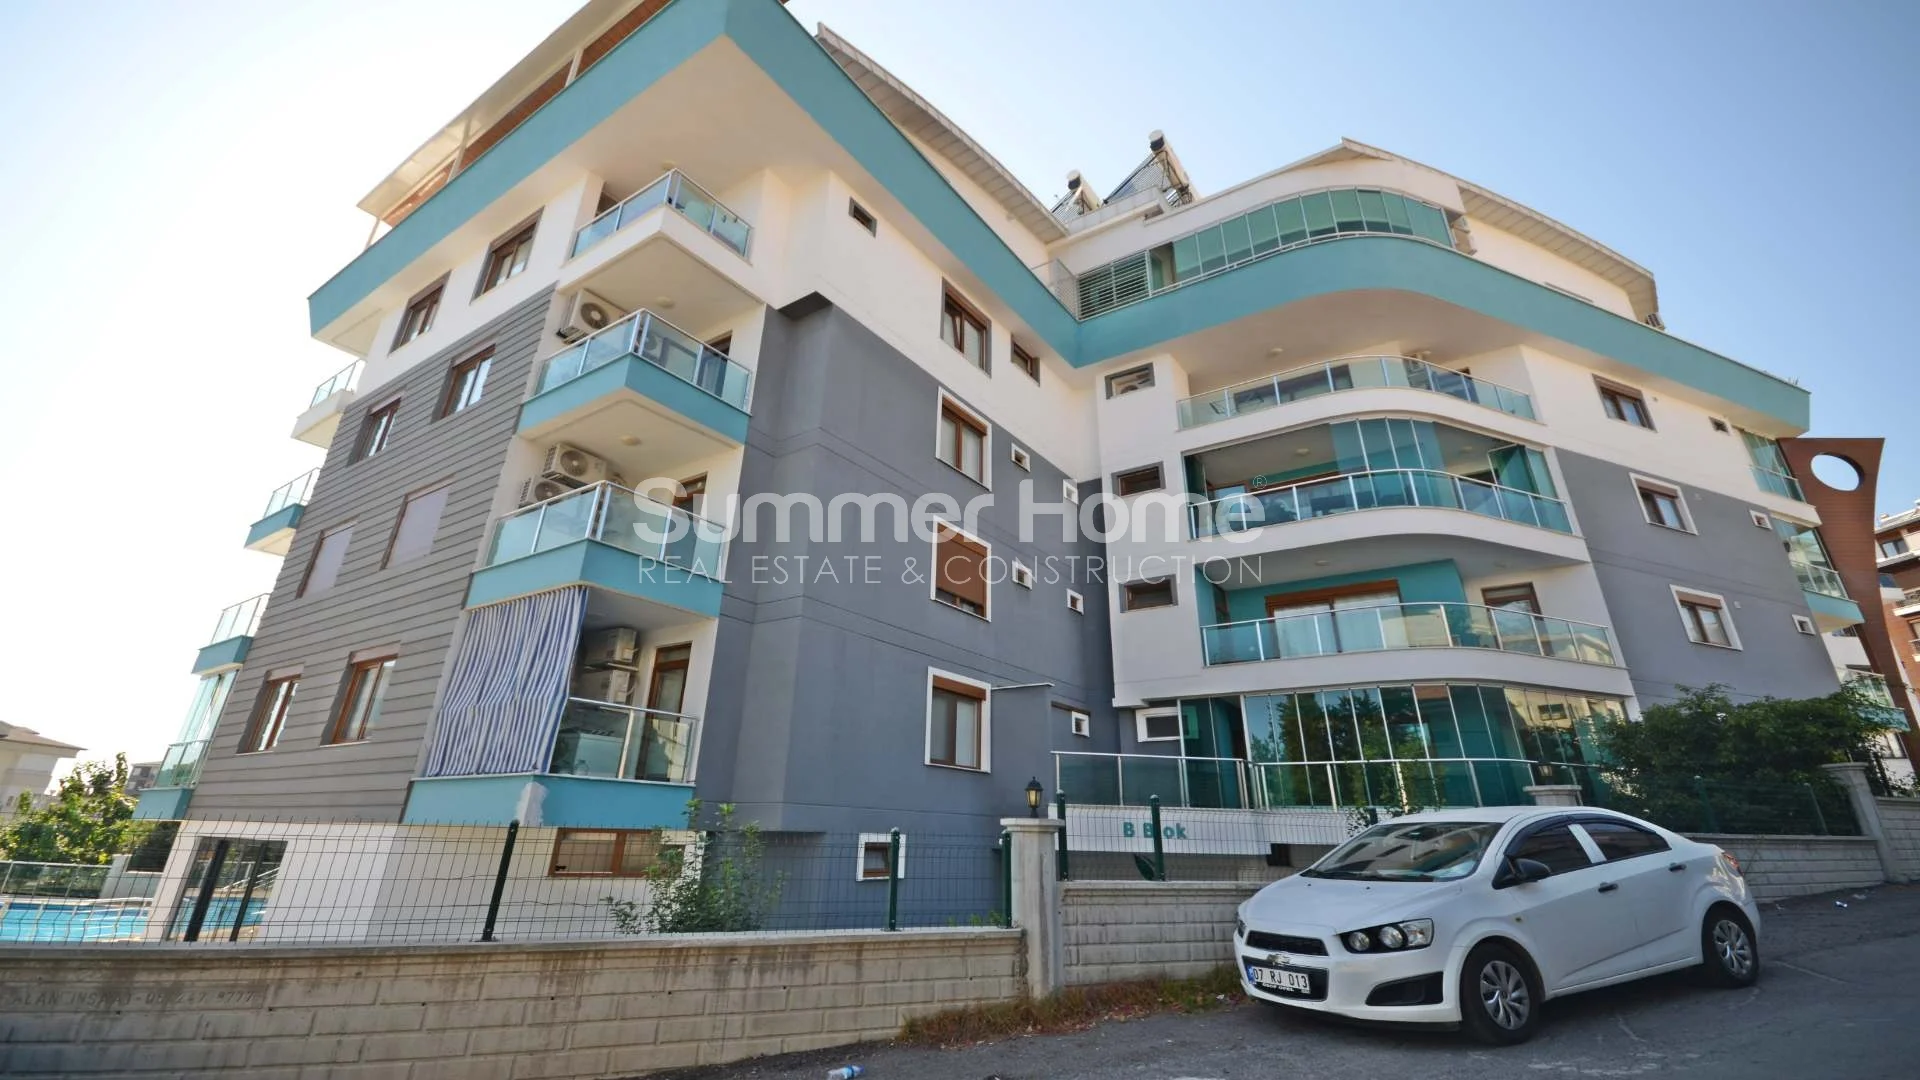 For sale Apartment Alanya Hasbahce general - 1